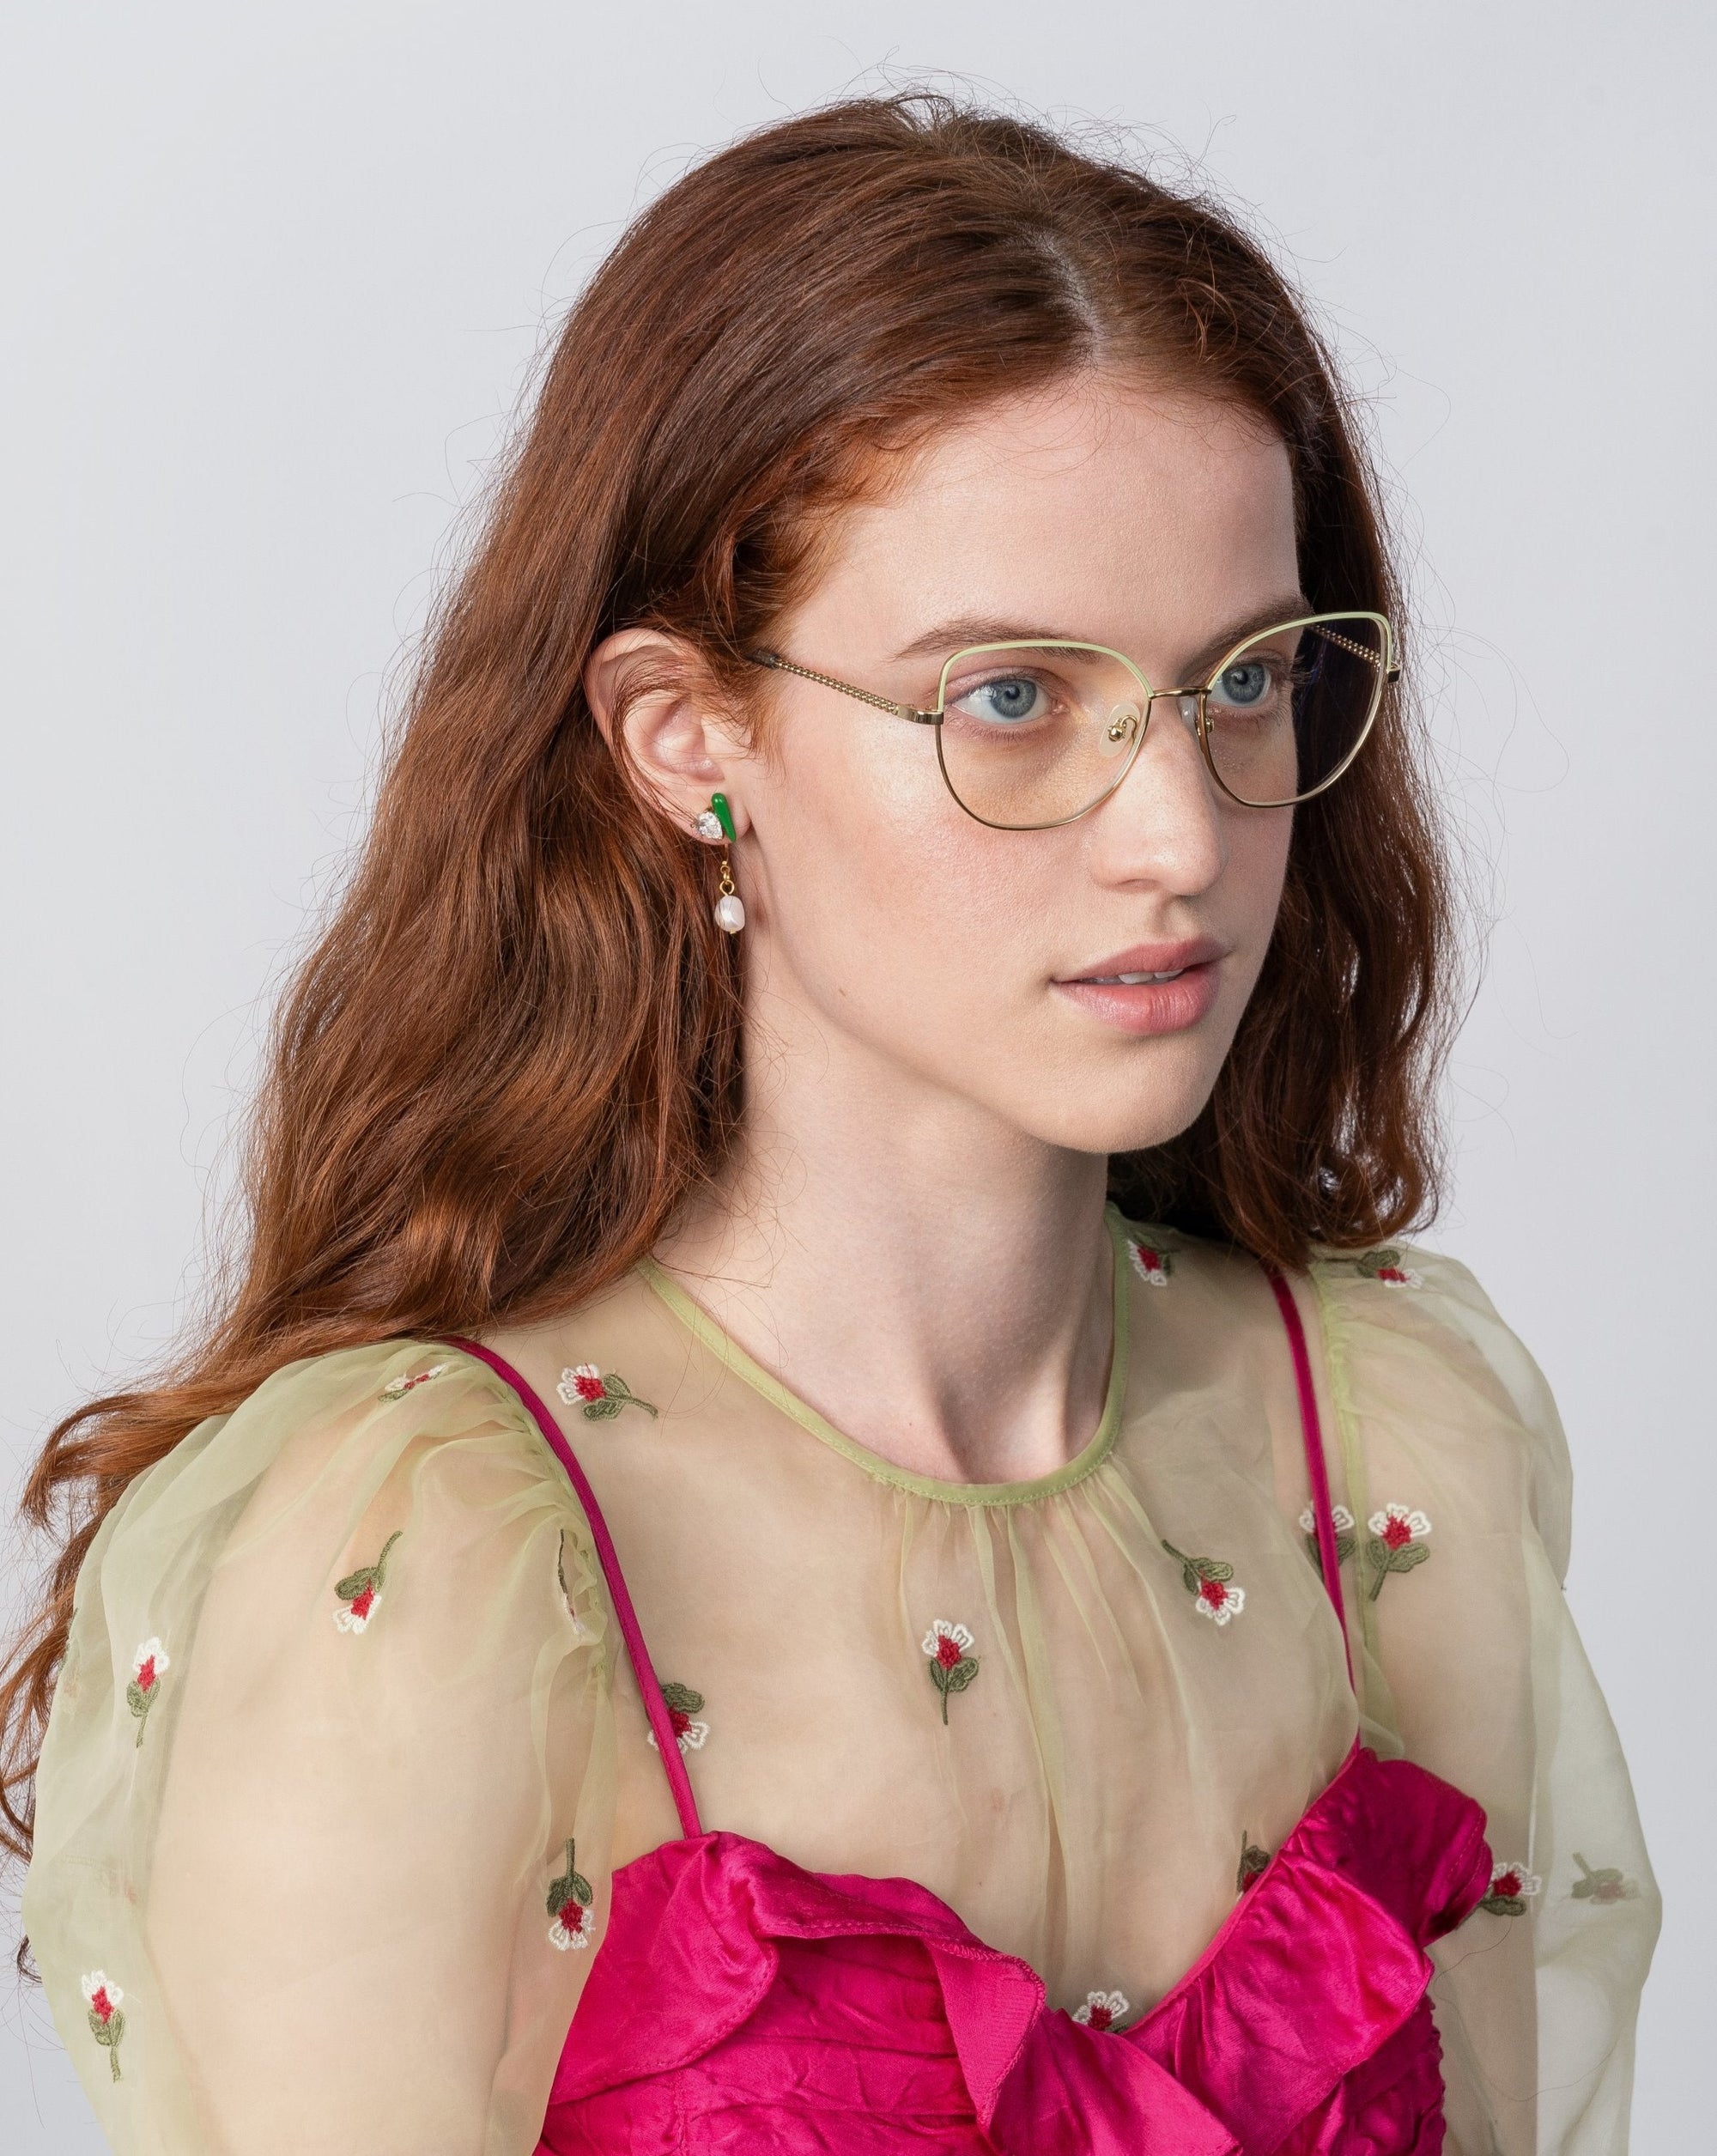 A woman with long, wavy red hair is wearing Ophelia glasses by For Art&#39;s Sake® with a cat-eye silhouette and a sheer beige top adorned with small embroidered flowers over a bright pink undergarment. She has green and pink earrings, and she is looking slightly to the side against a plain, light gray background.